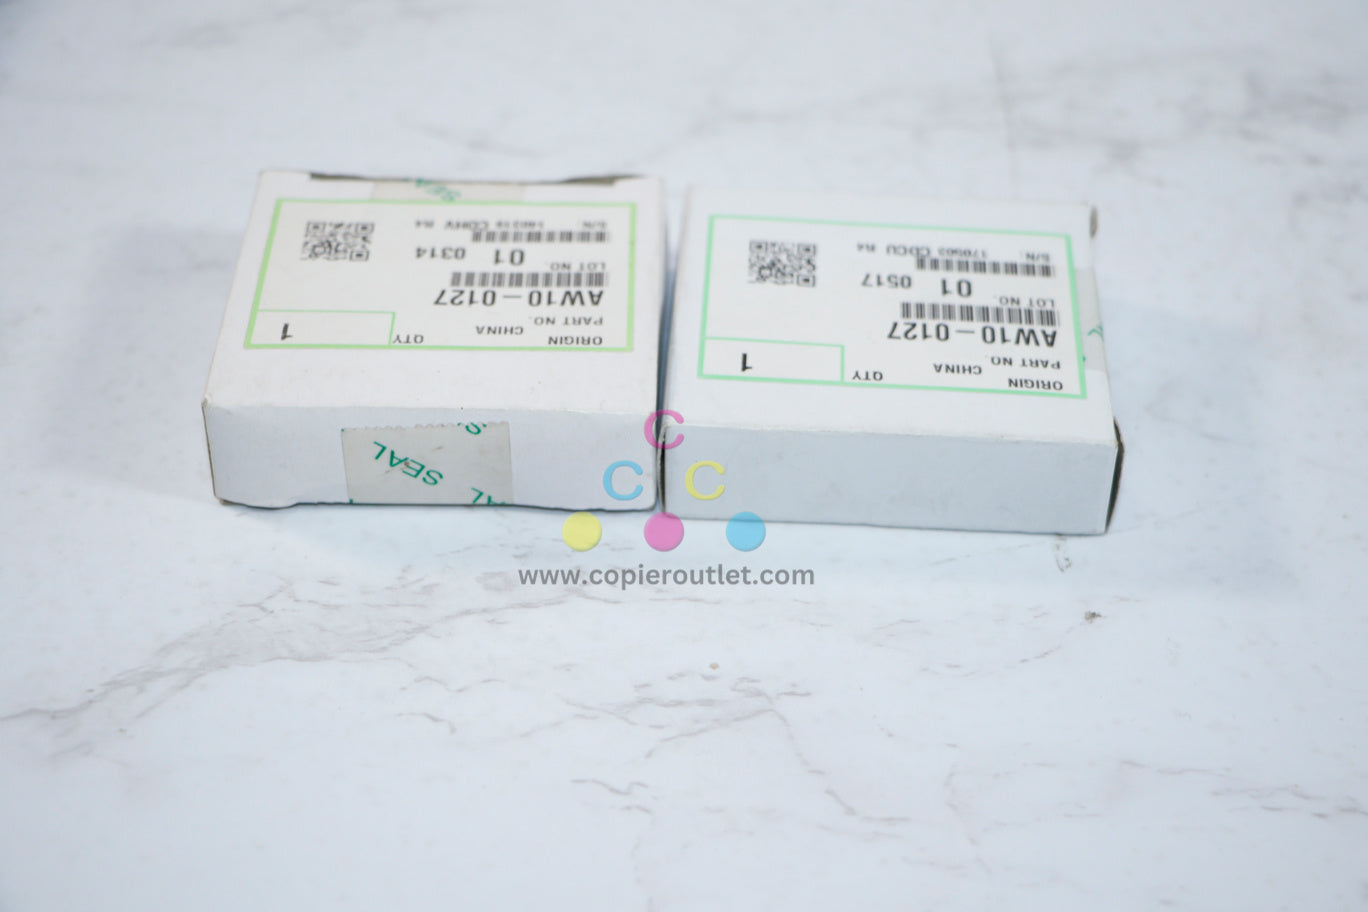 2 OEM Ricoh MPC2030,MPC2050 Fuser Middle Pressure Thermistor AW10-0127(AW100127)